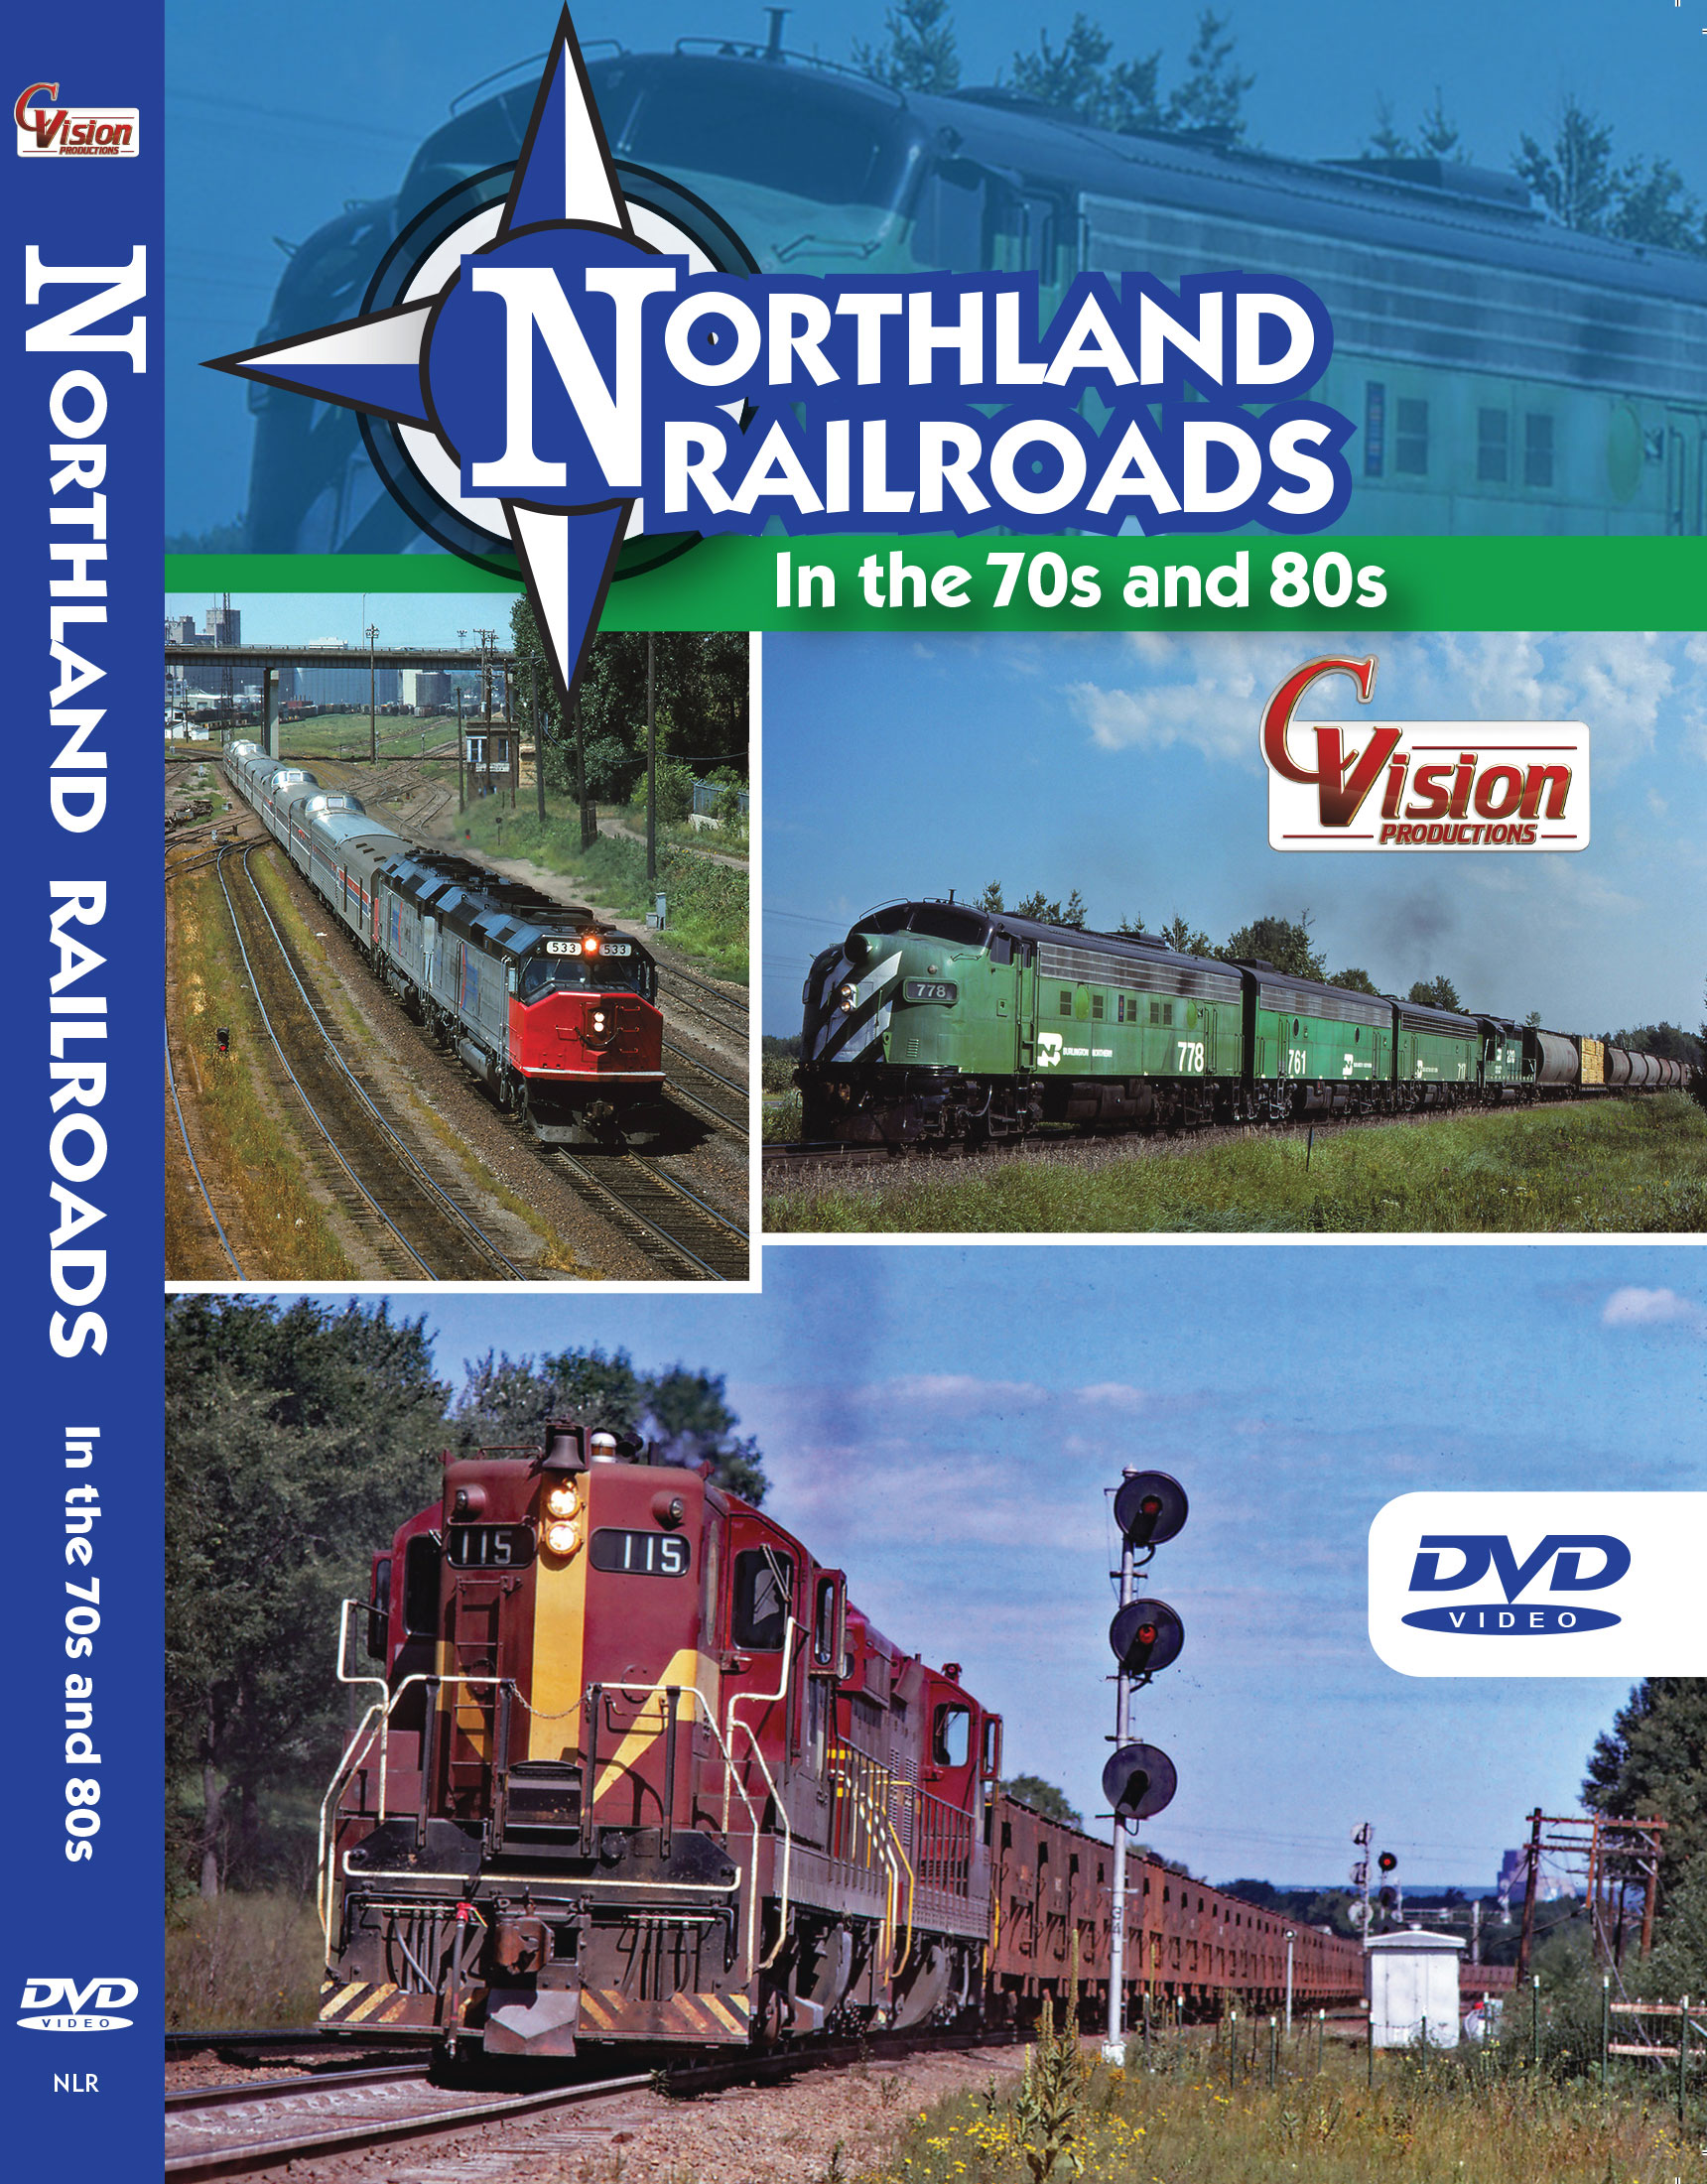 Northland Railroads in the 70s and 80s DVD C Vision Productions NLR